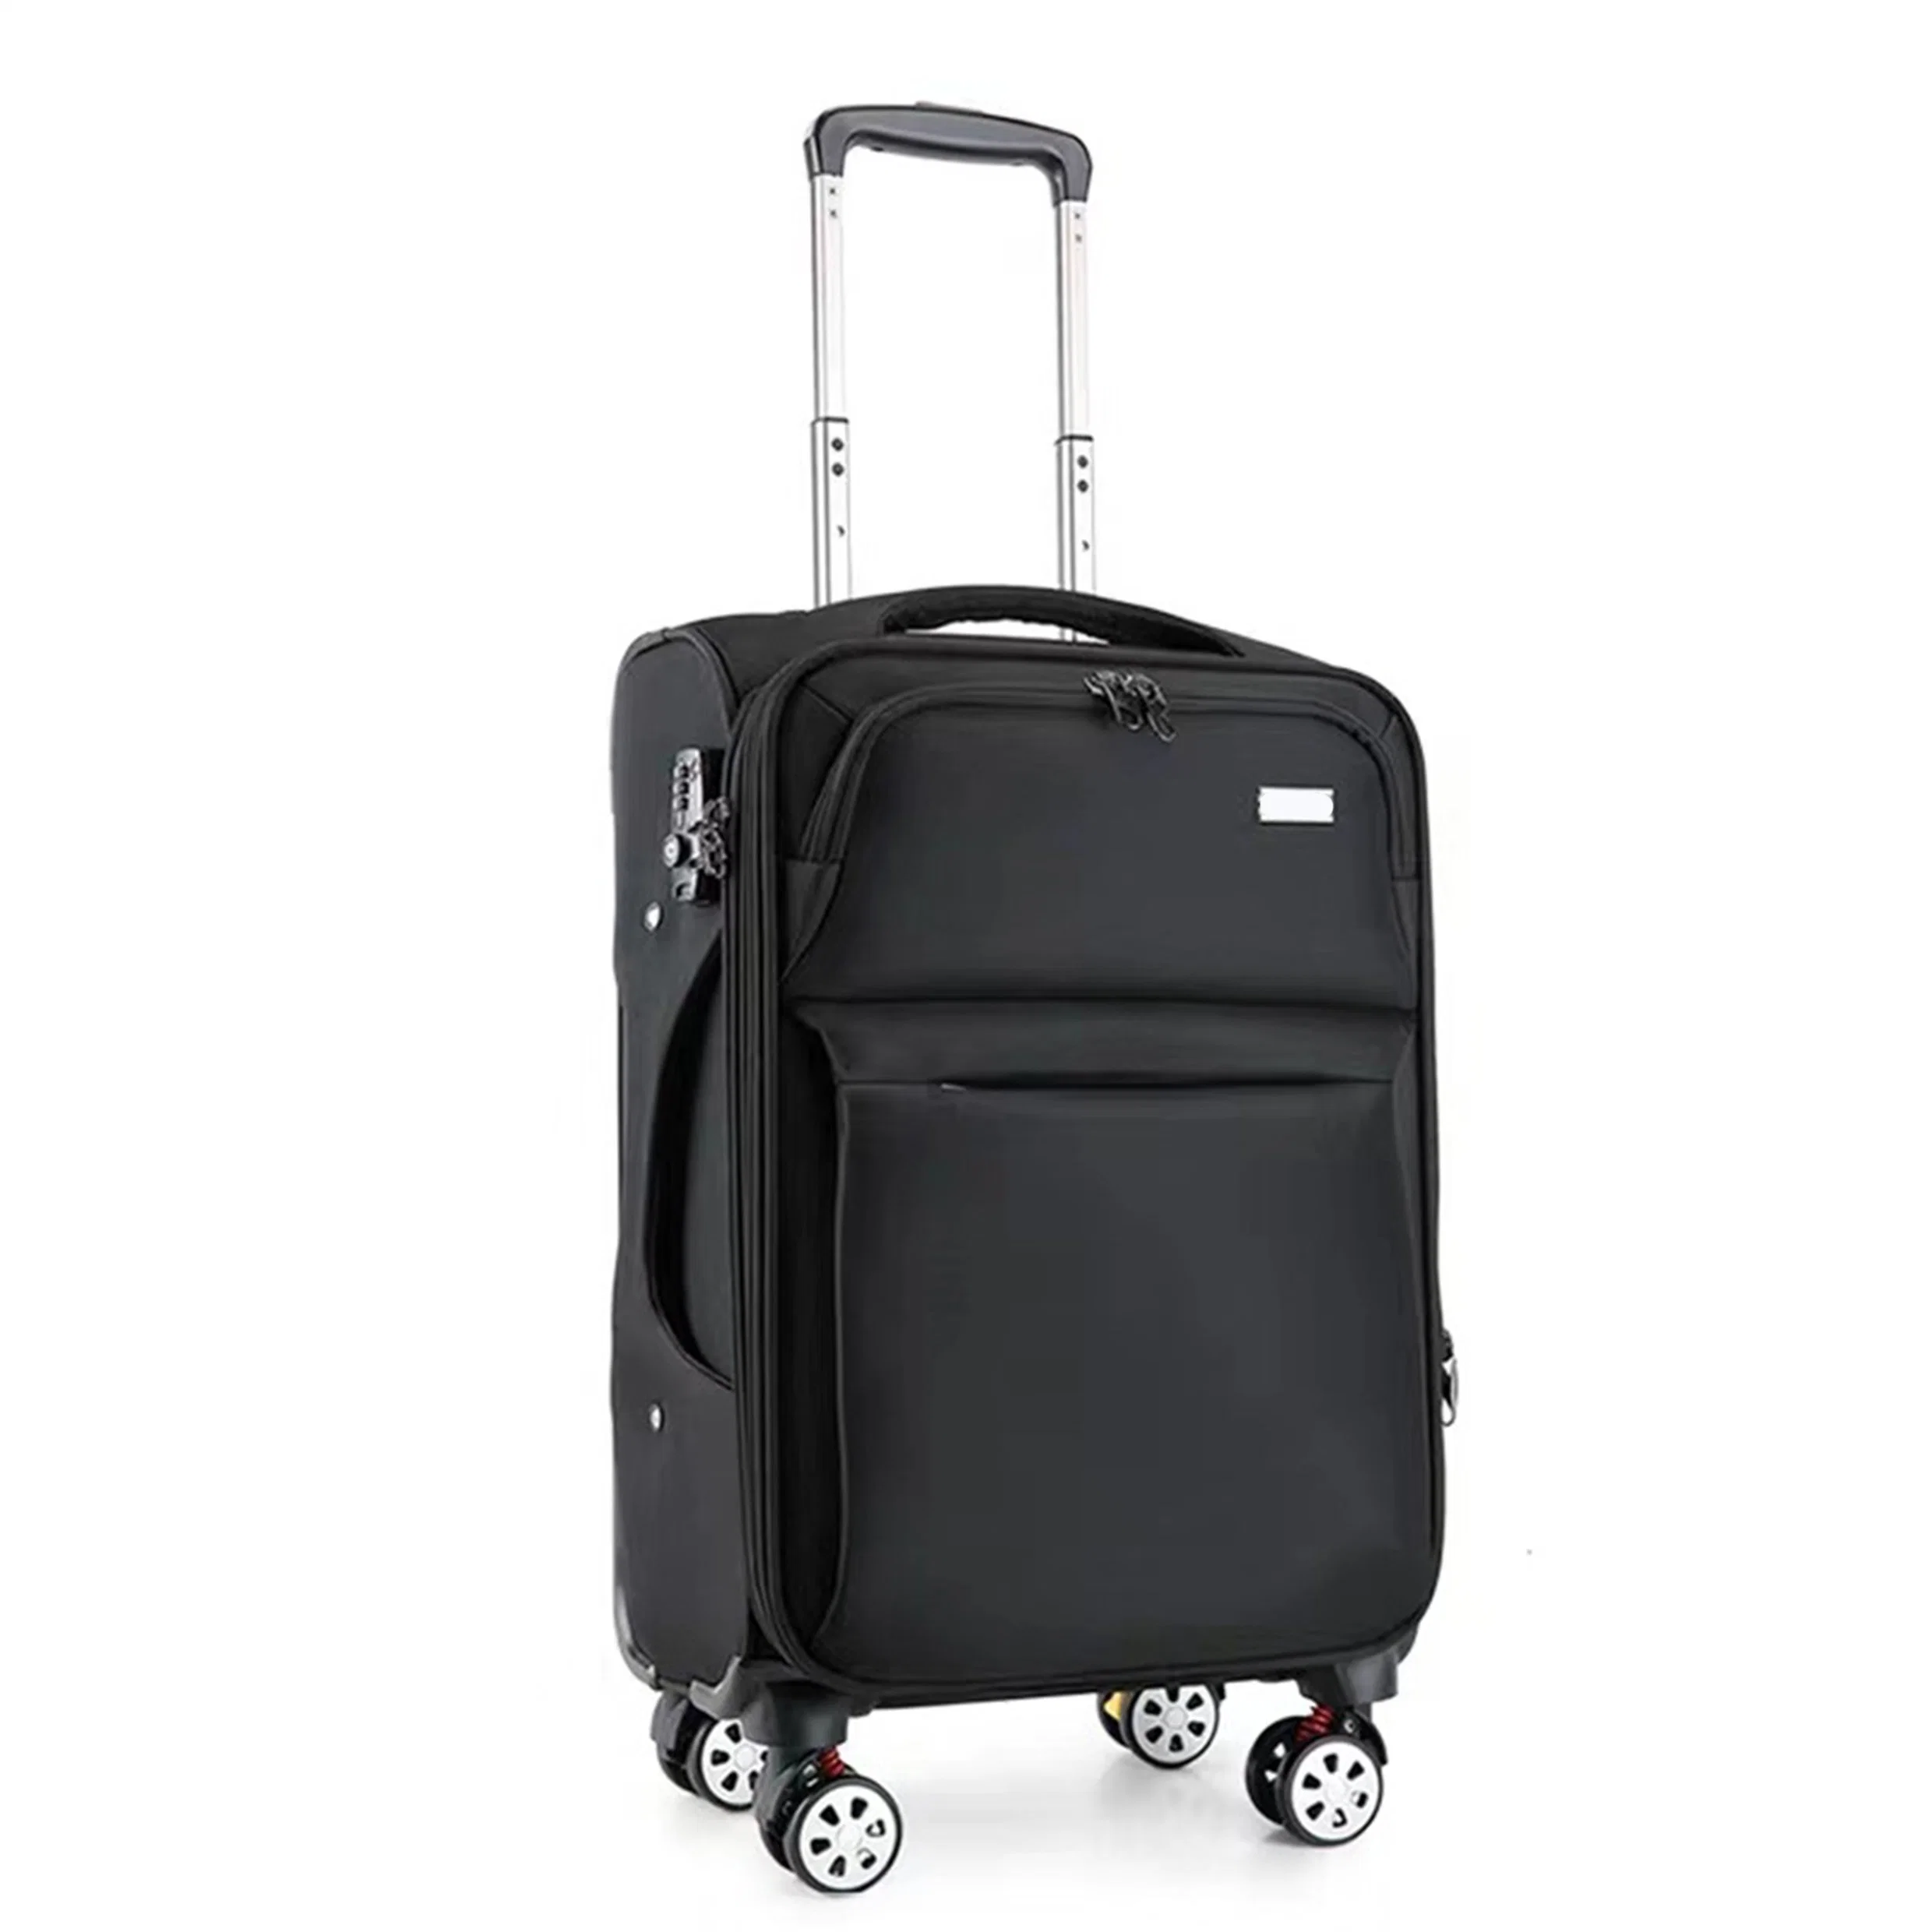 Travelling Bags Trolley Luggage Suitcases Sets Travel Suitcase Valigia Trolley Case Suitcase Travel Luggage Set for Outdoors